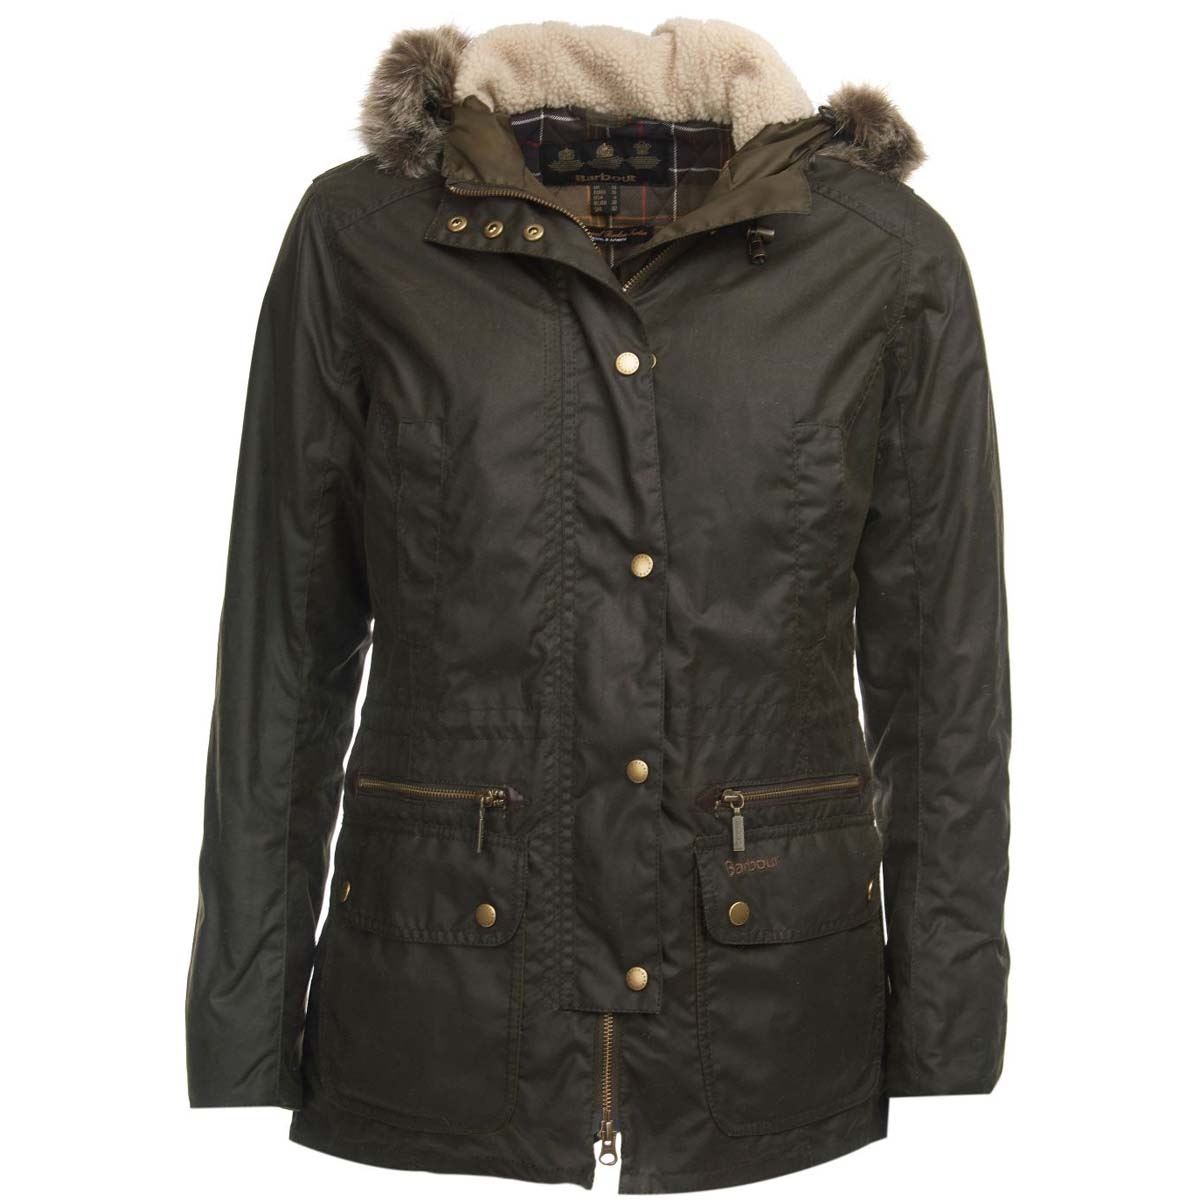 Barbour Kelsall Jacket Questions & Answers